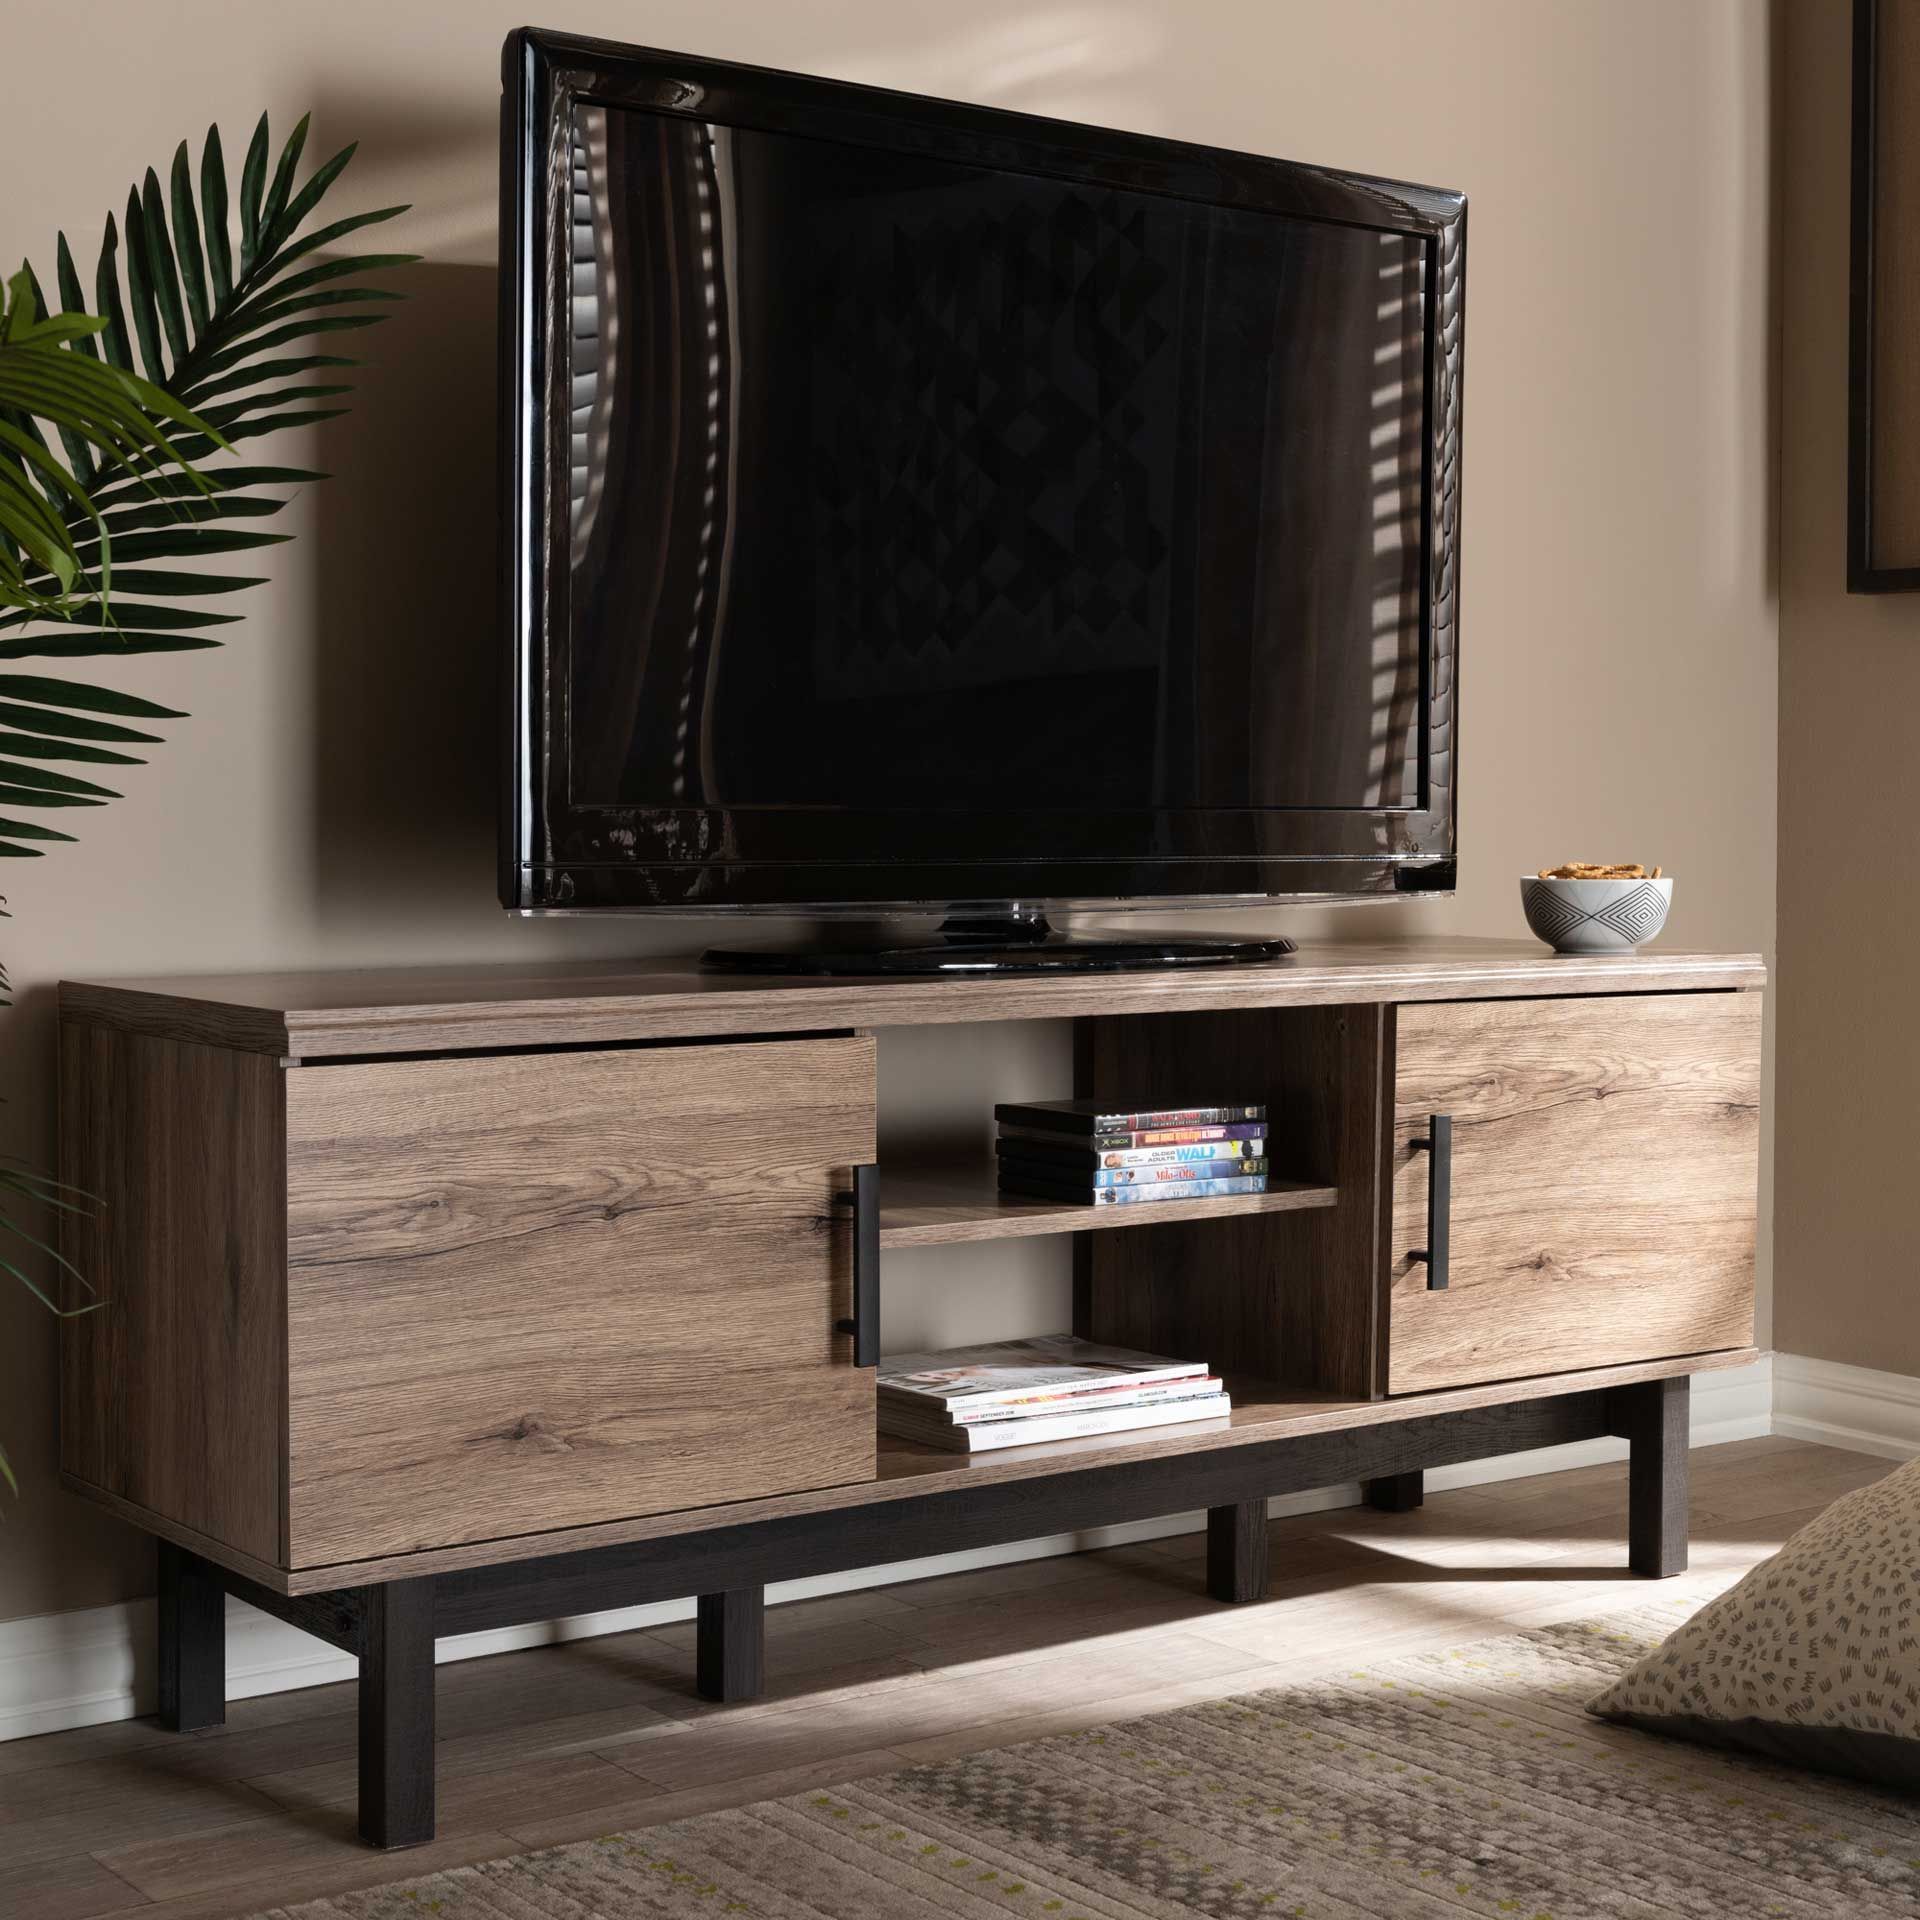 Clean Lines And A Display Of Natural Wood Grains Make The Ariel Tv Regarding Tv Stands With 2 Doors And 2 Open Shelves (Gallery 3 of 20)